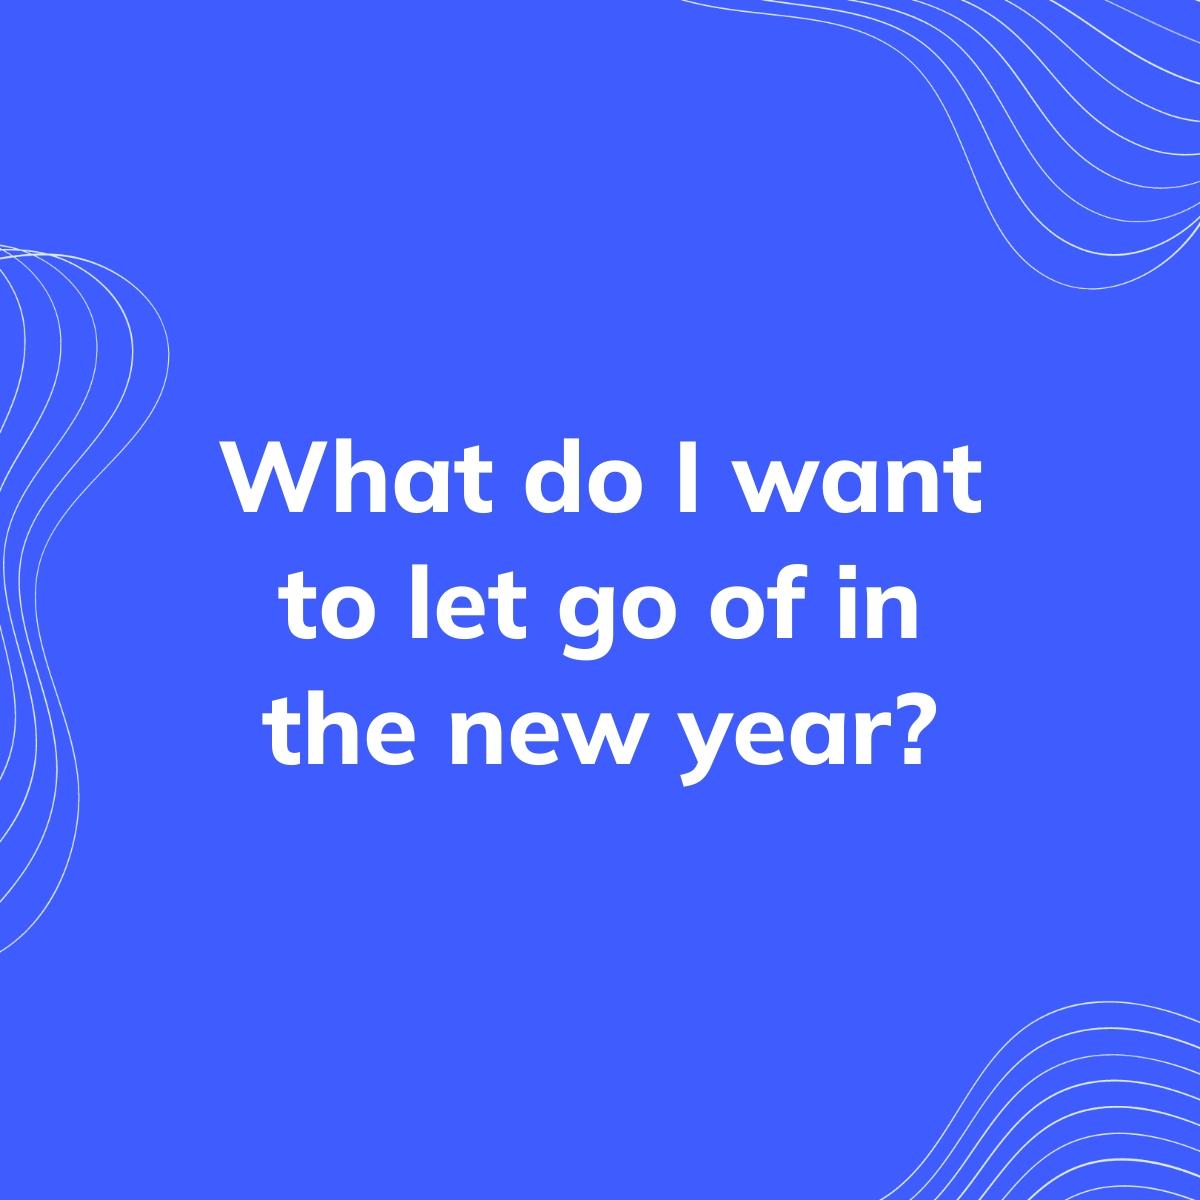 Journal Prompt: What do I want to let go of in the new year?